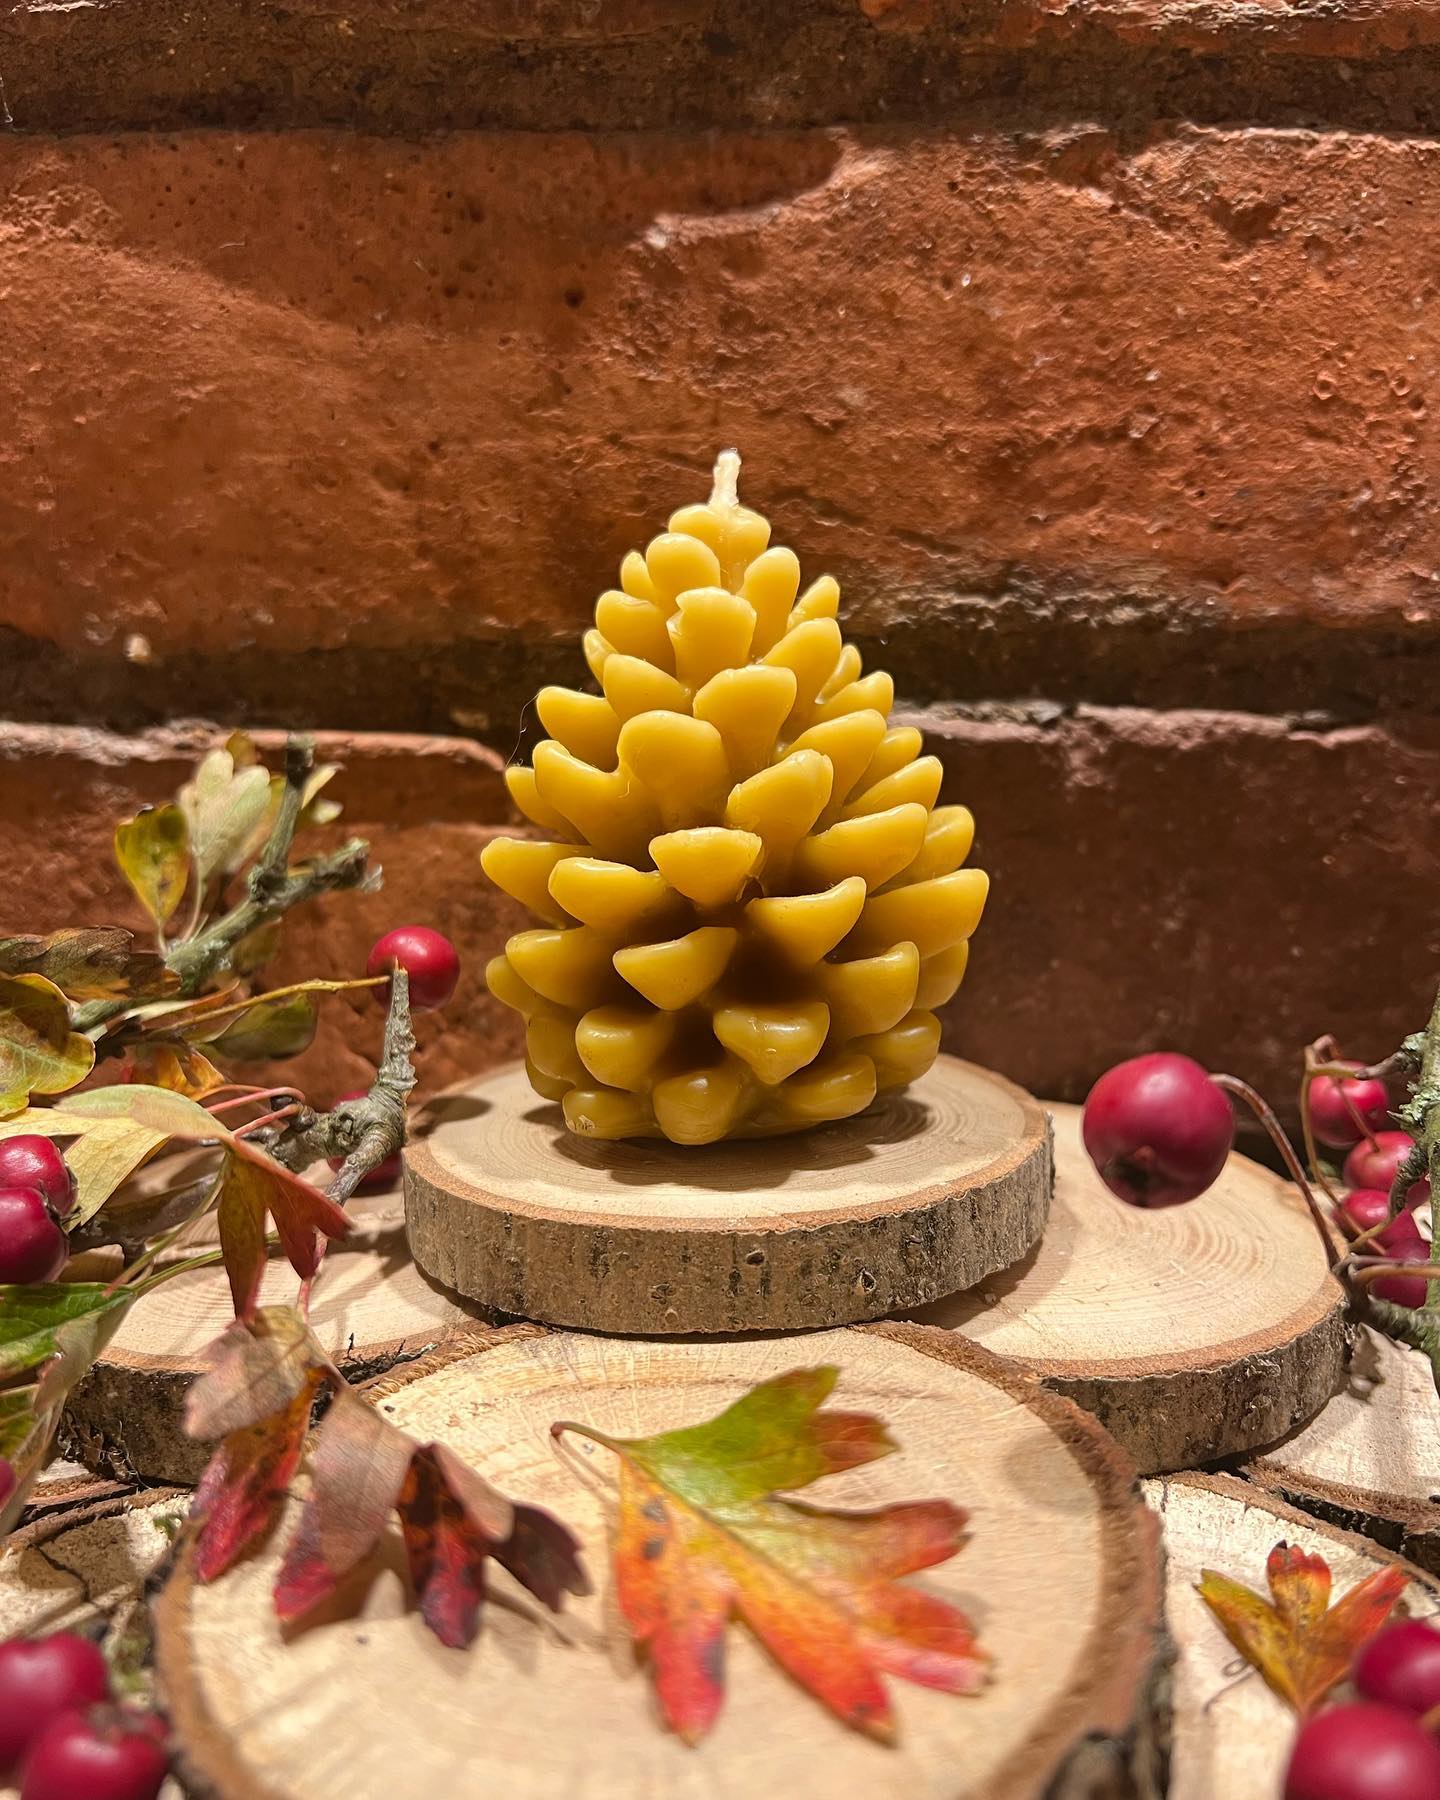 Gower Beeswax Honeycomb Pinecone candle